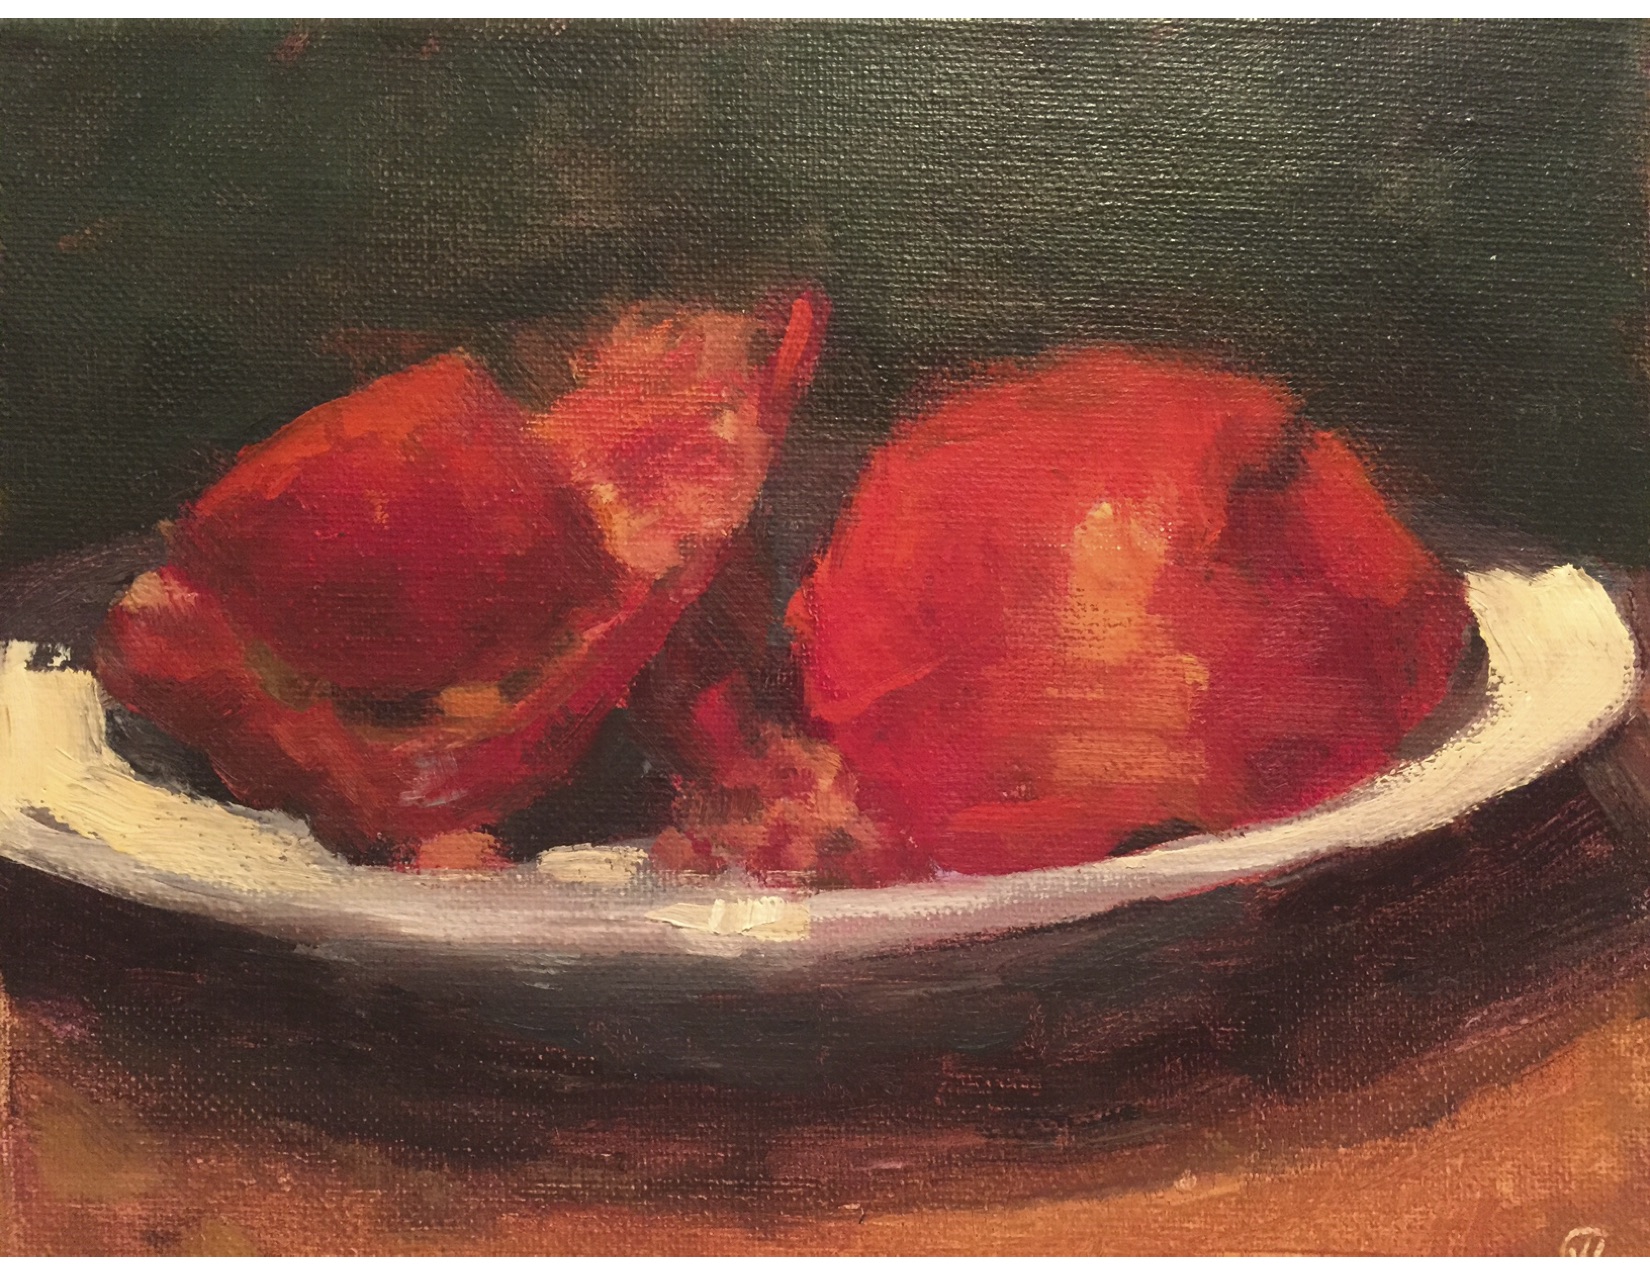 Pomegranate, Oil on canvas, 8"x10" collection of the artist NFS